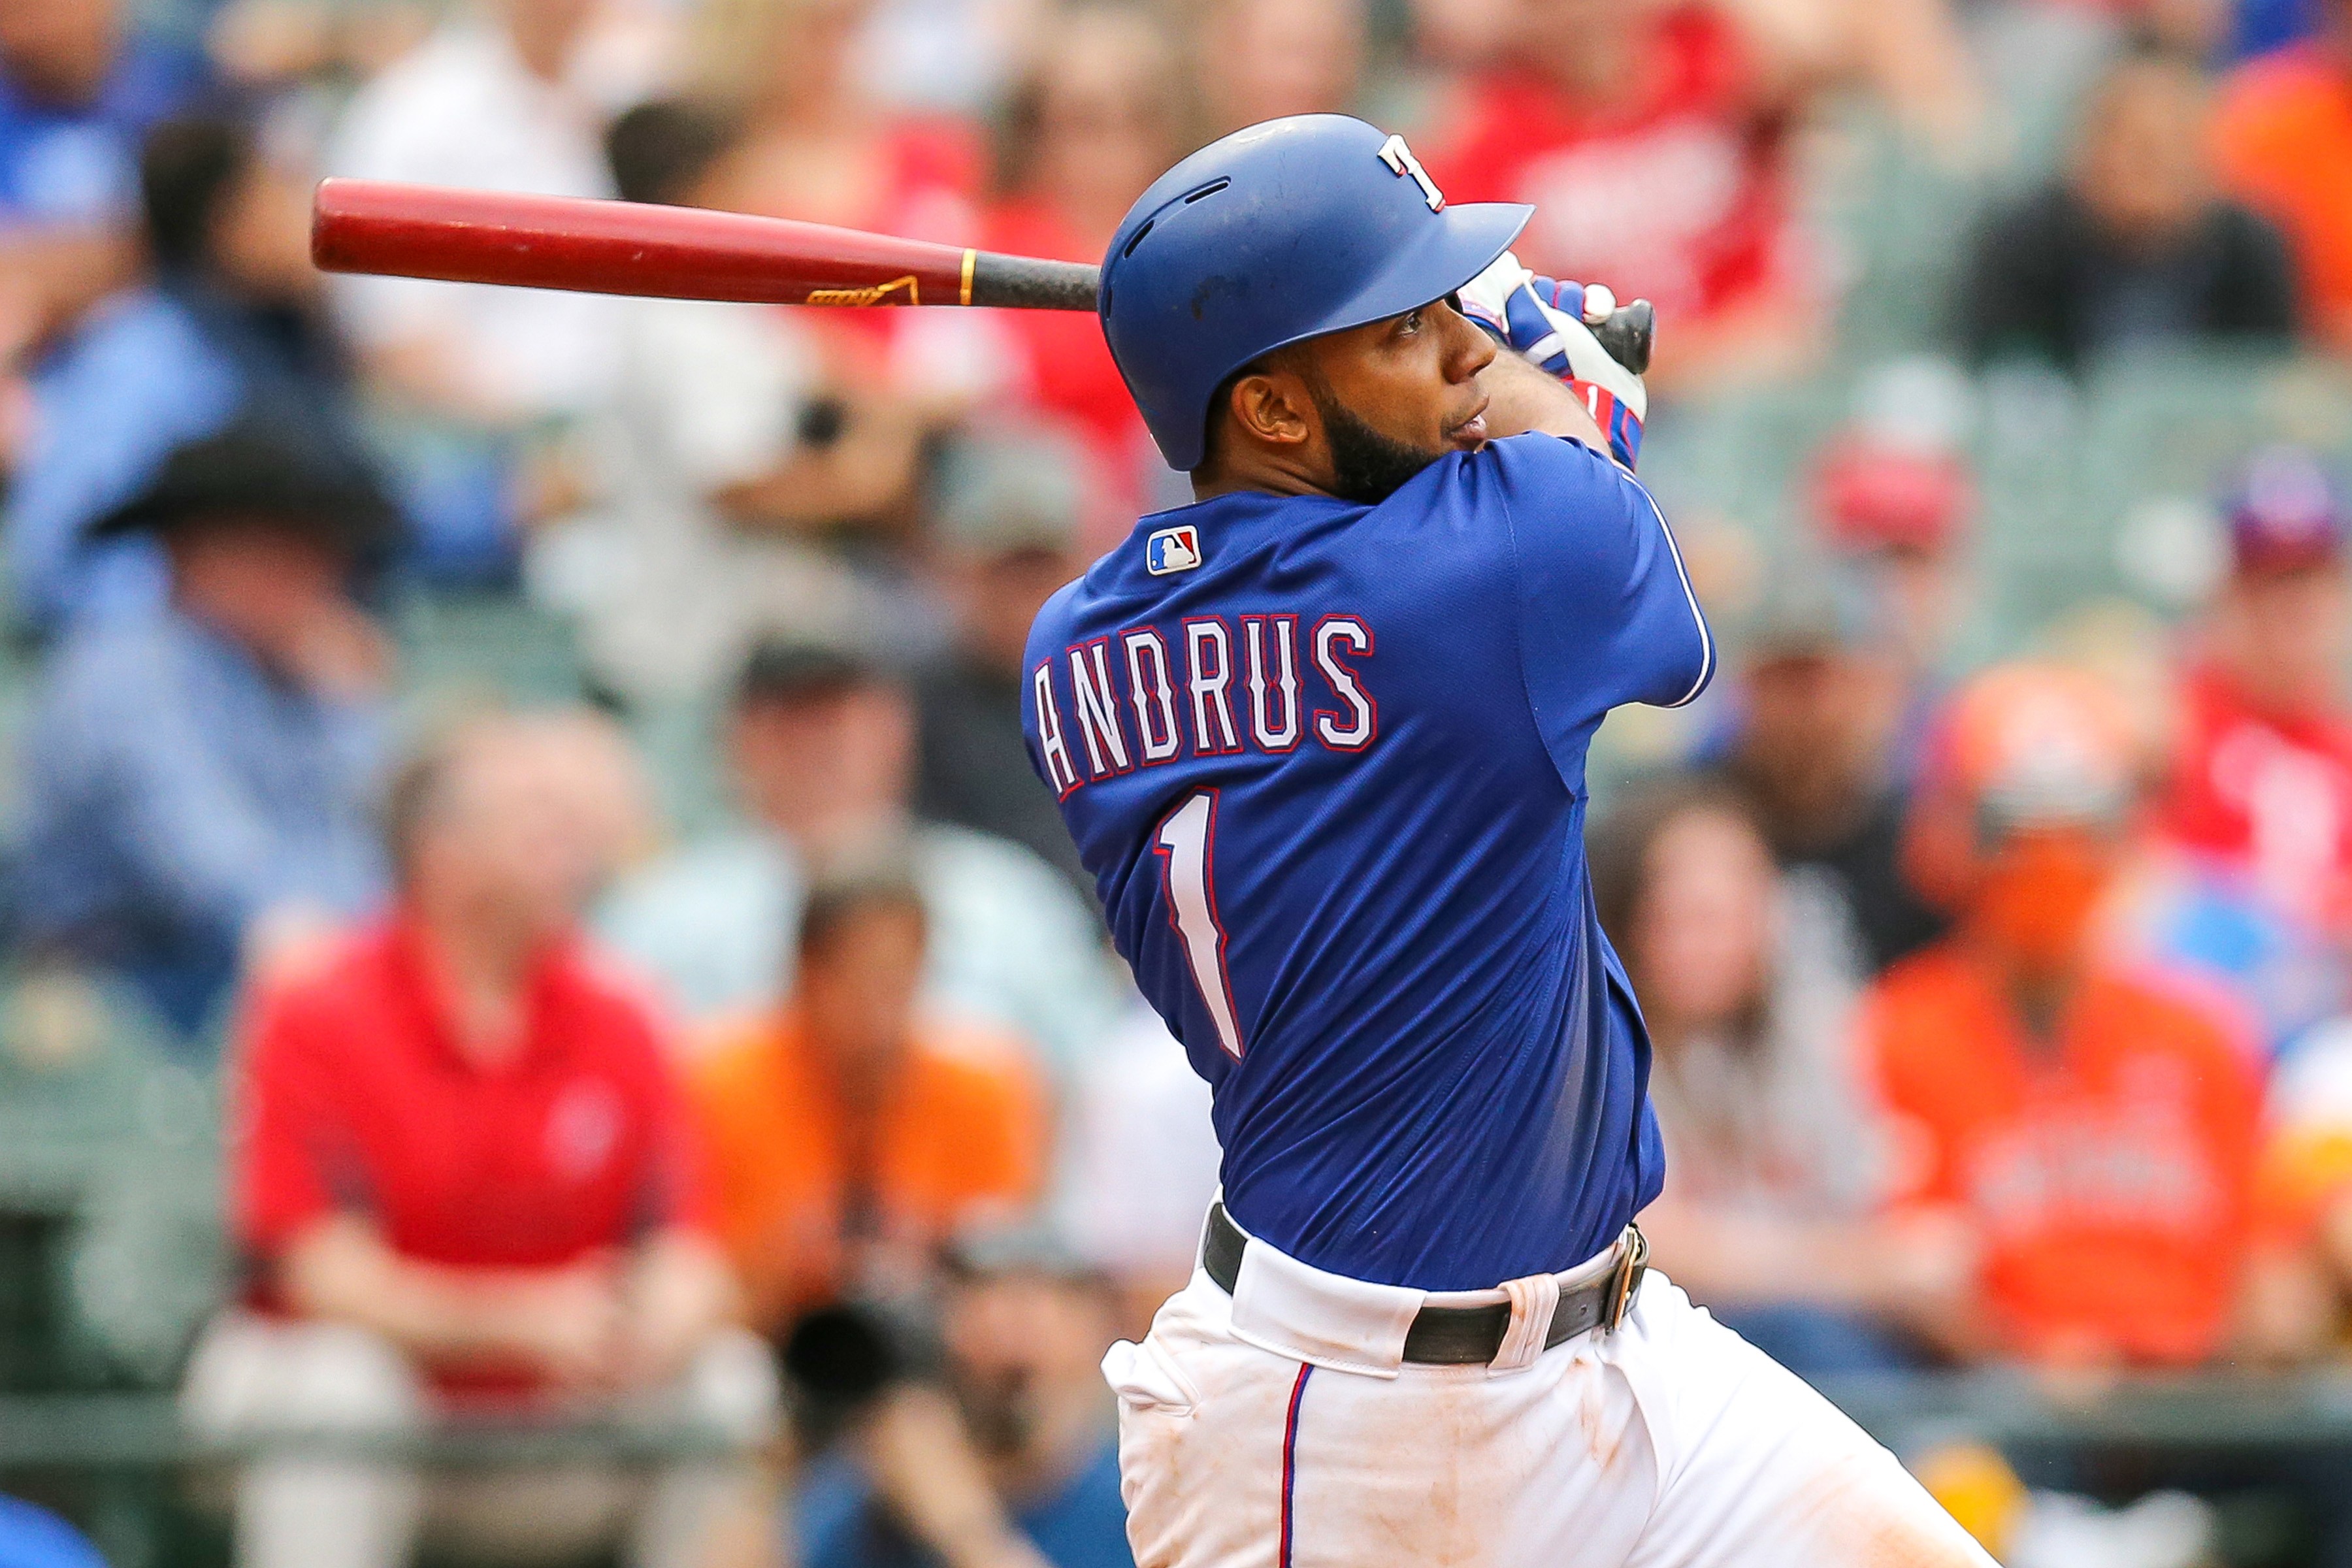 Elvis Andrus hit by pitch, suffers fractured right elbow - NBC Sports